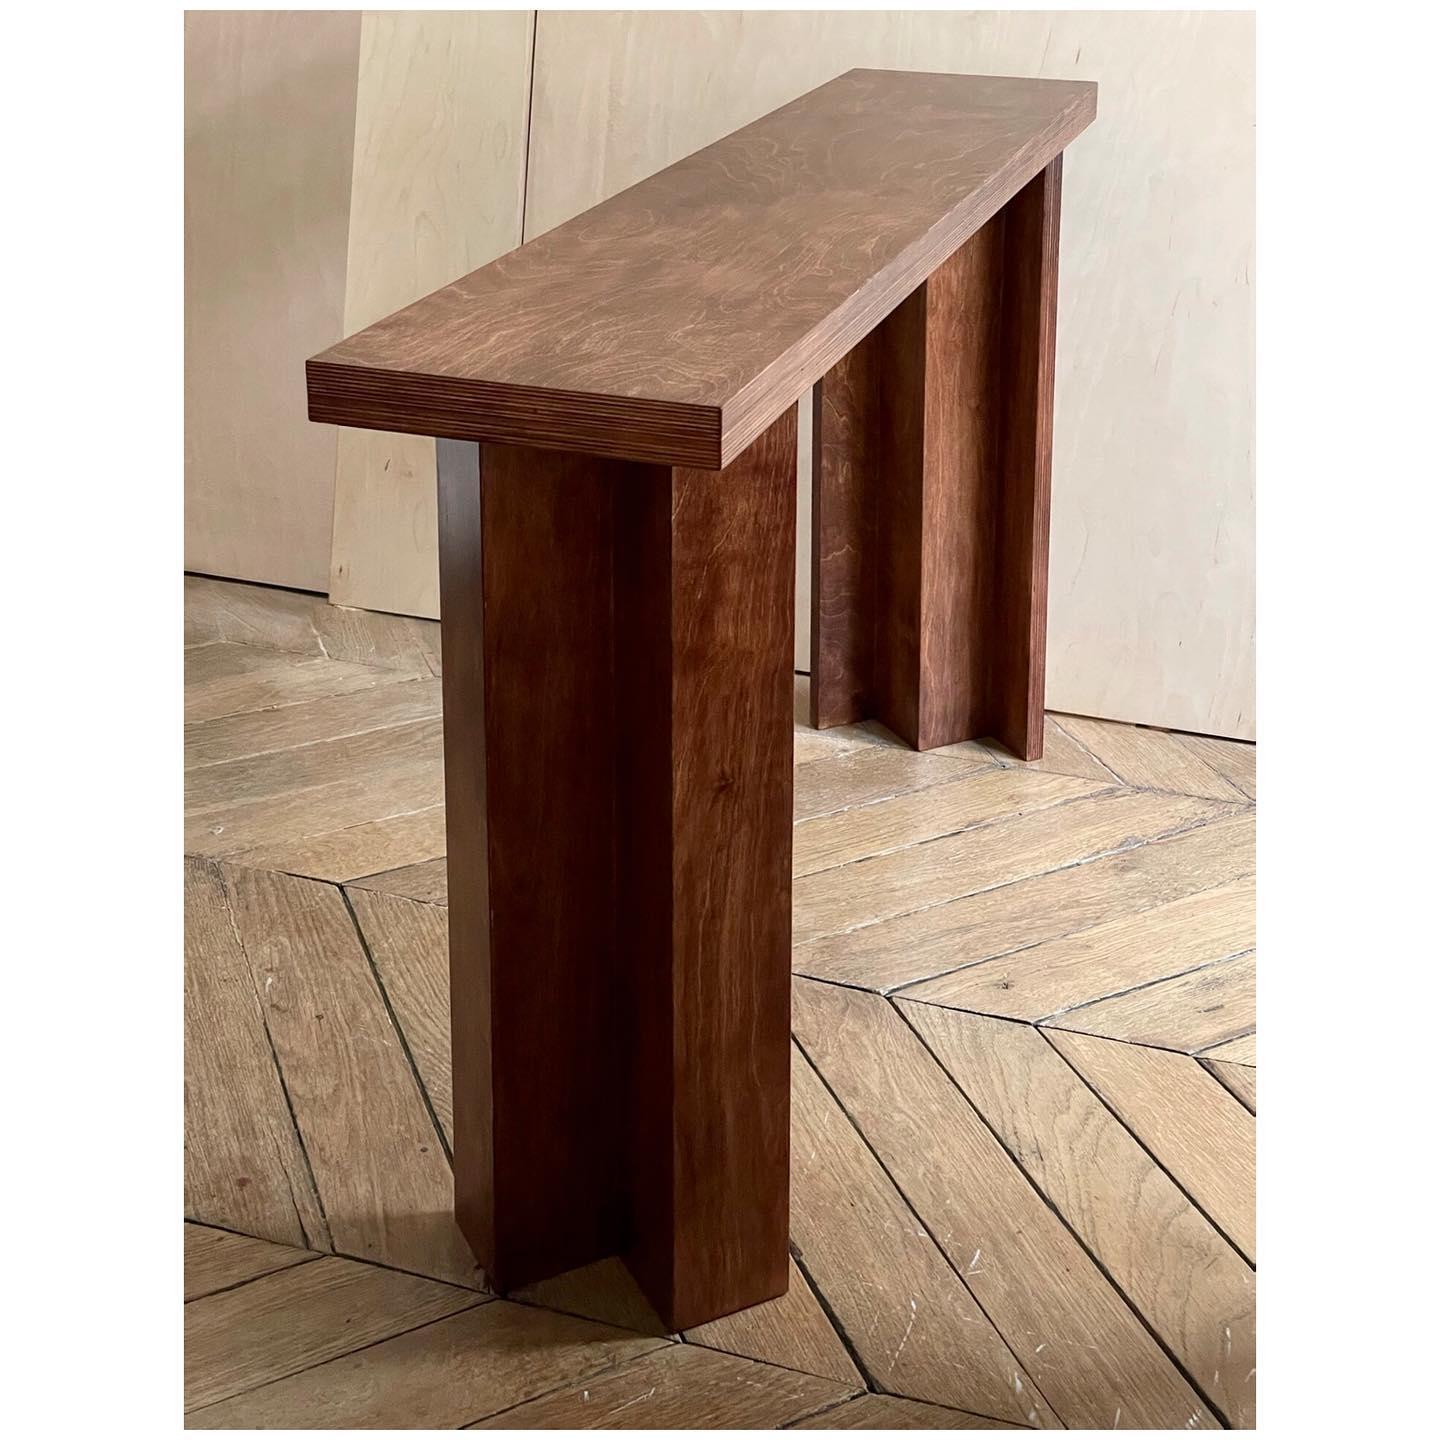 Unique console table by Goons. 
Dimensions: W 120 x D 27 x H 74 cm
Materials: Wood
Dimensions can be adjusted +/- 10 cm

Goons is located in Paris France all of this desings are made in wood.